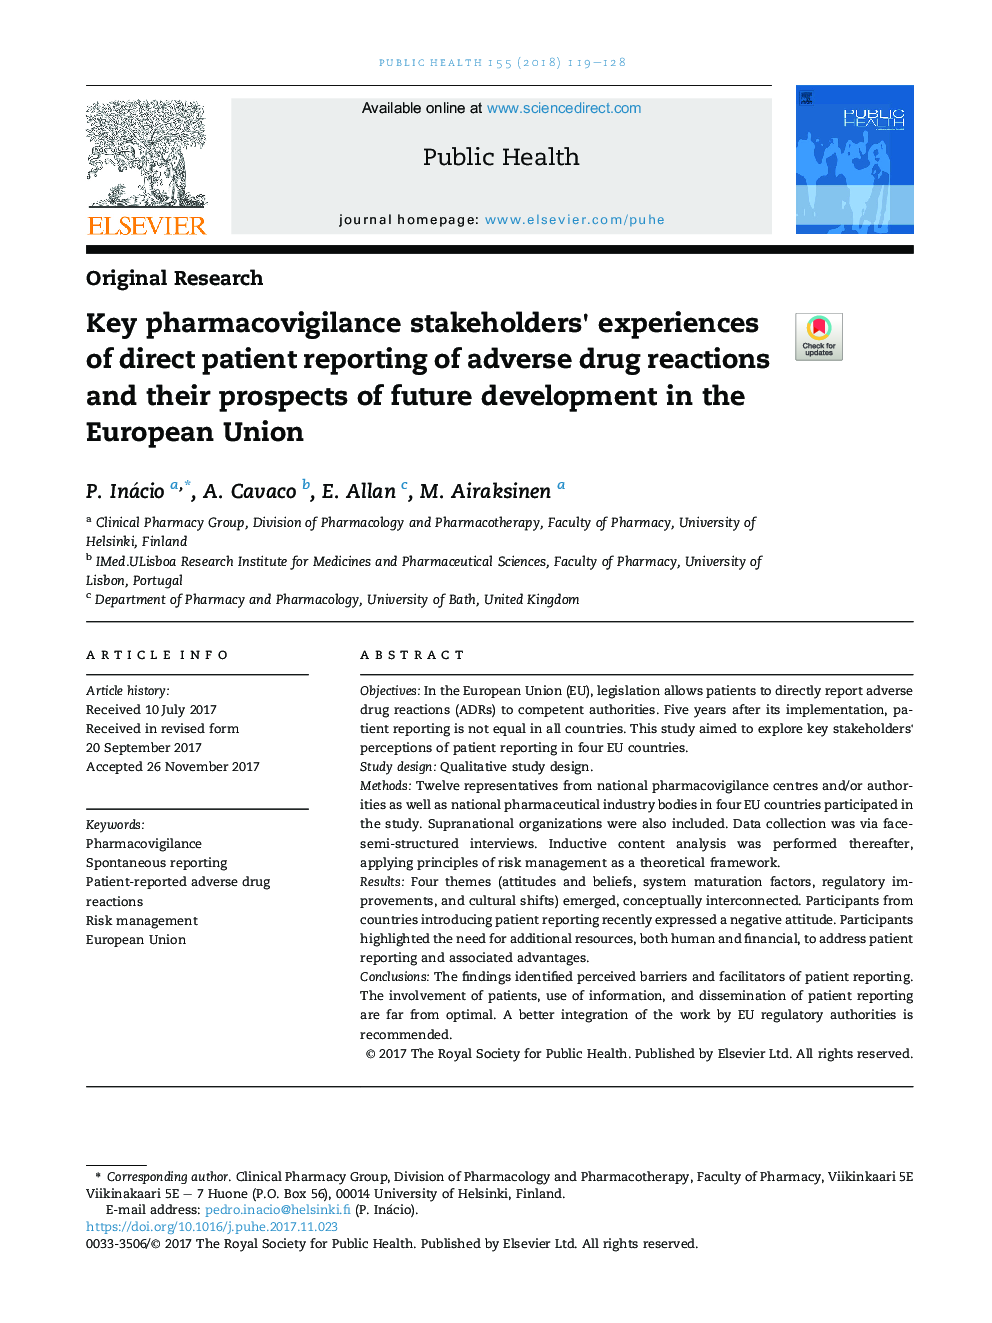 Key pharmacovigilance stakeholders' experiences of direct patient reporting of adverse drug reactions and their prospects of future development in the European Union